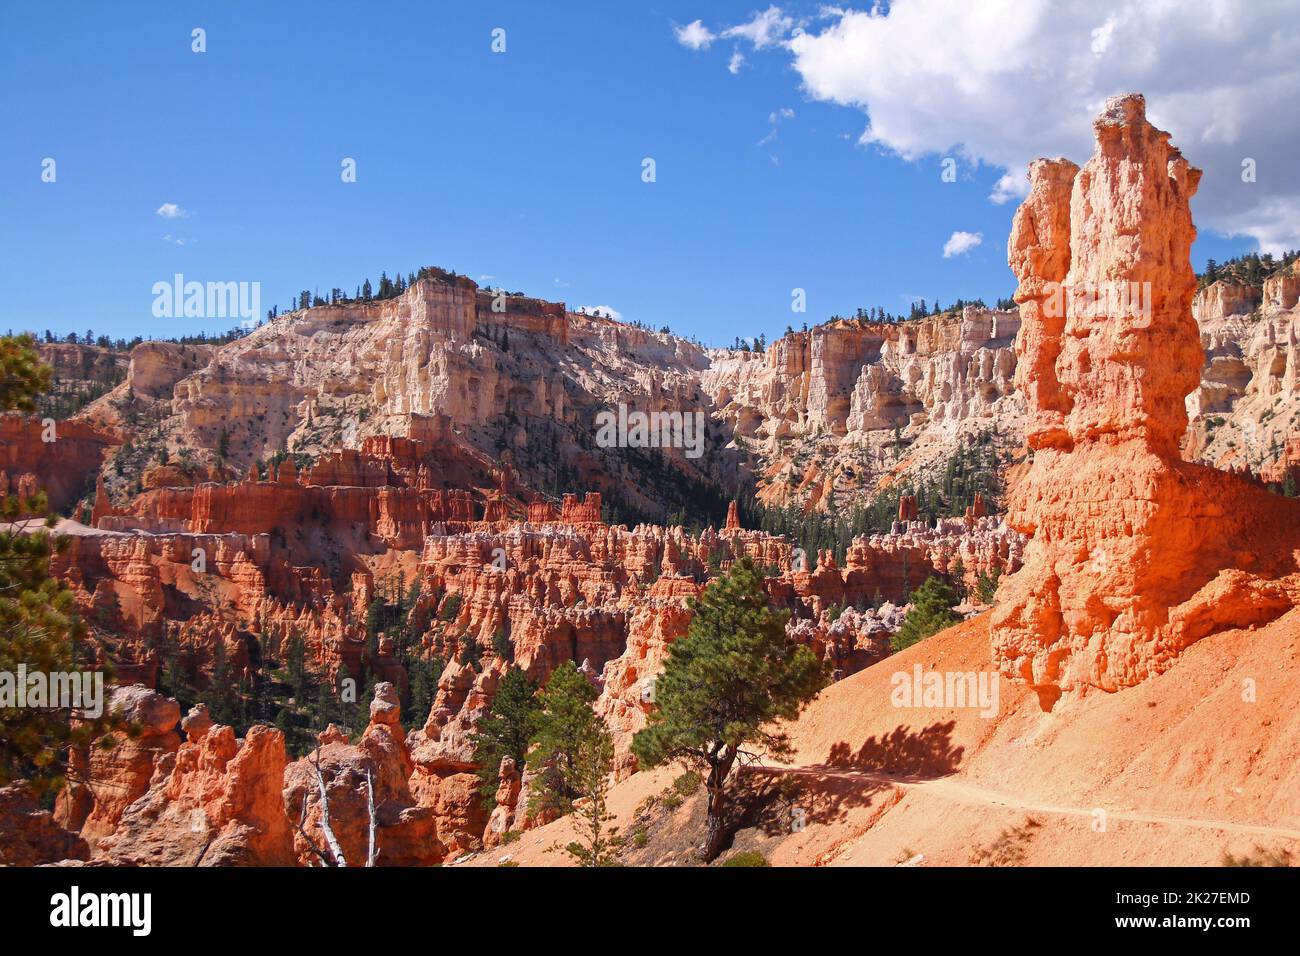 The wild trail around the big orange rocks of the Bryce Canyon National Park Stock Photo